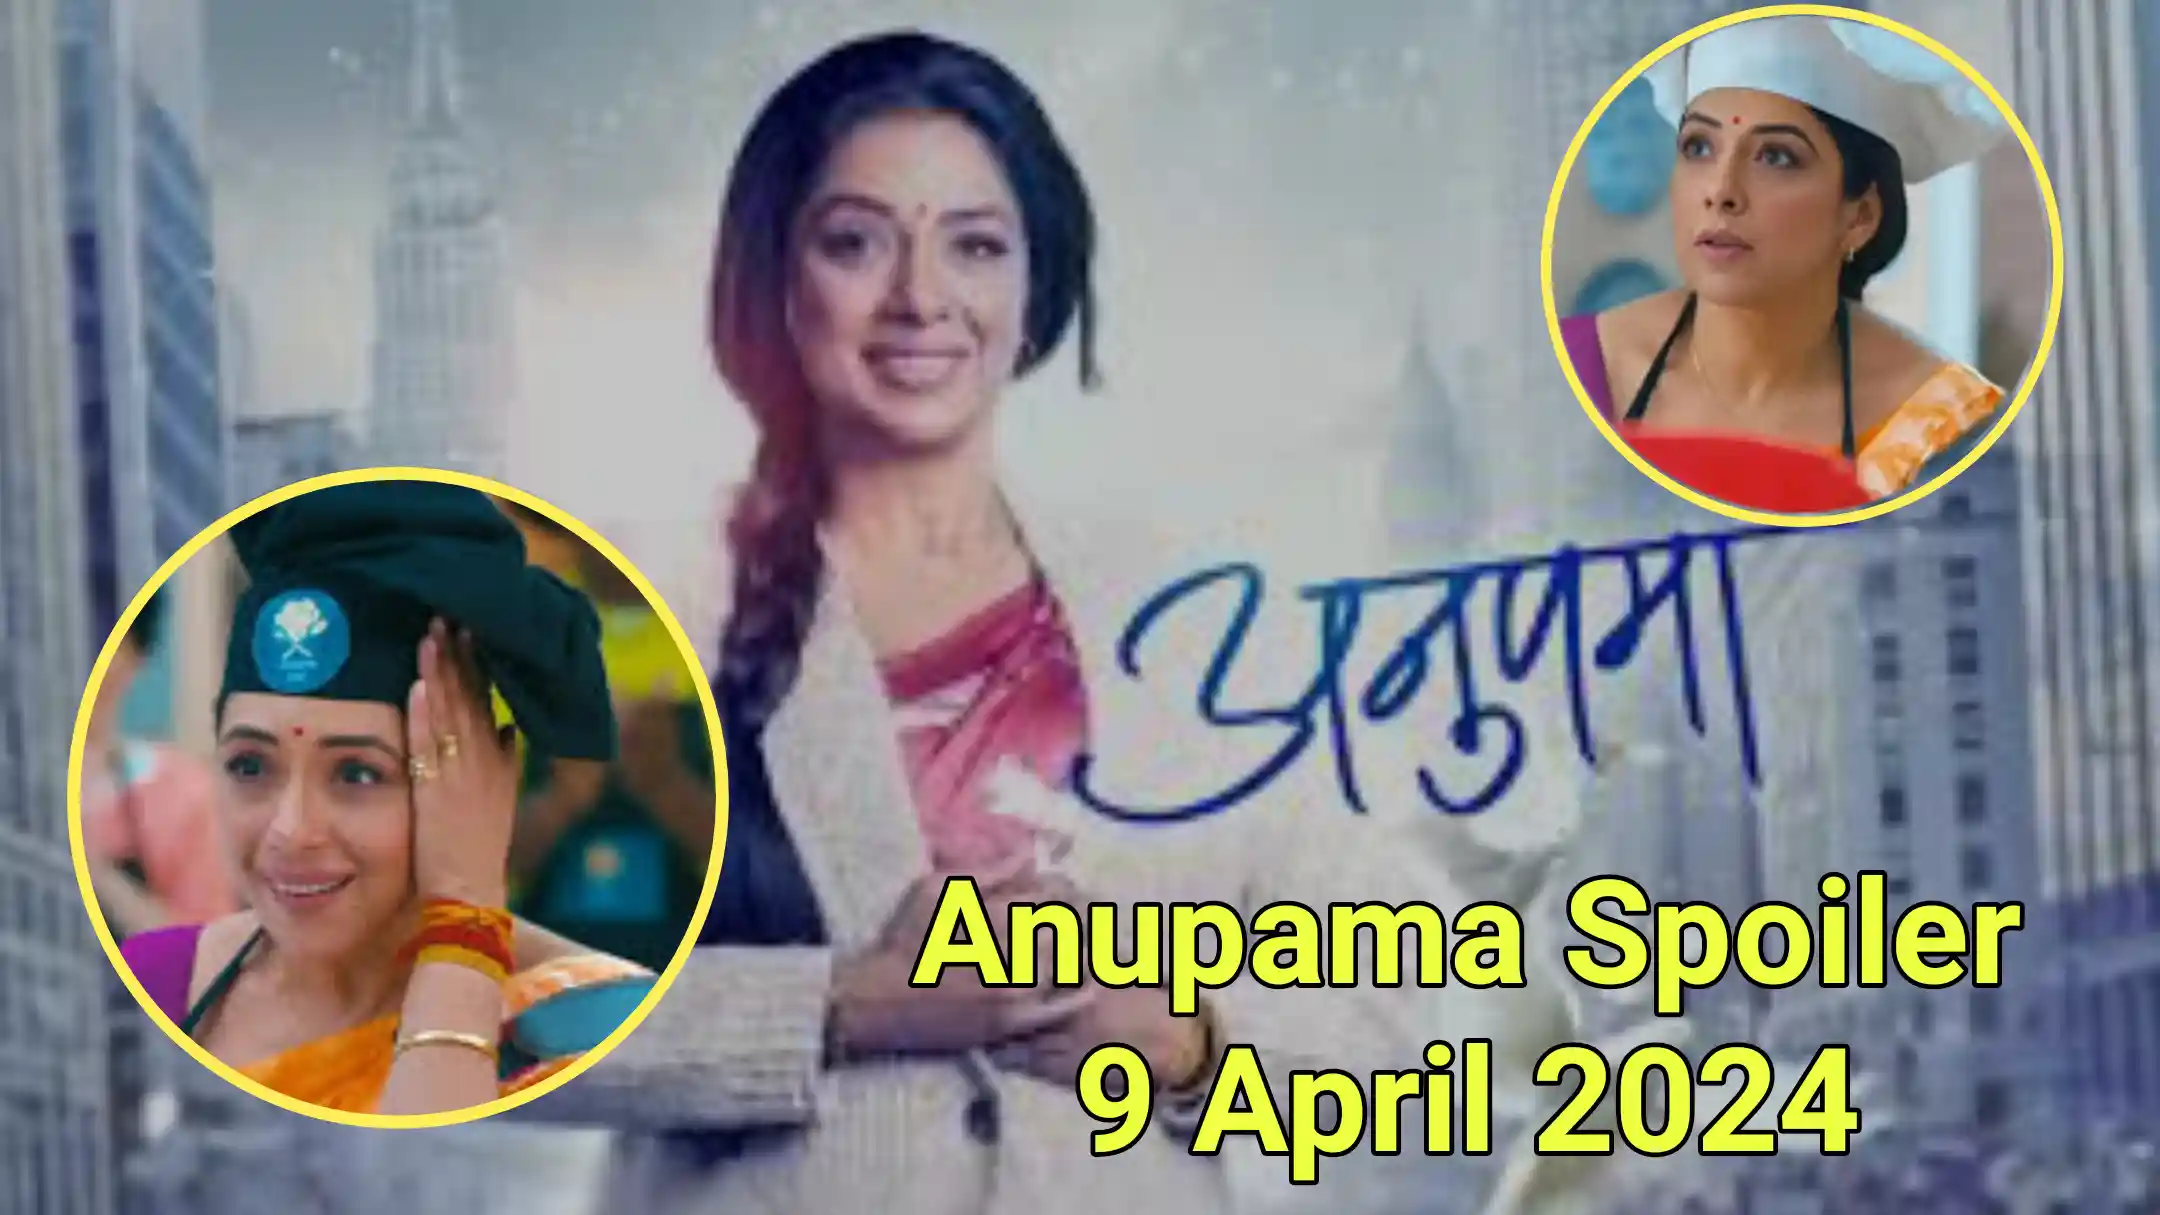 Anupama Spoiler 9 April: Anupama gave a befitting reply to the judge, Shruti played a new game in front of Anuj